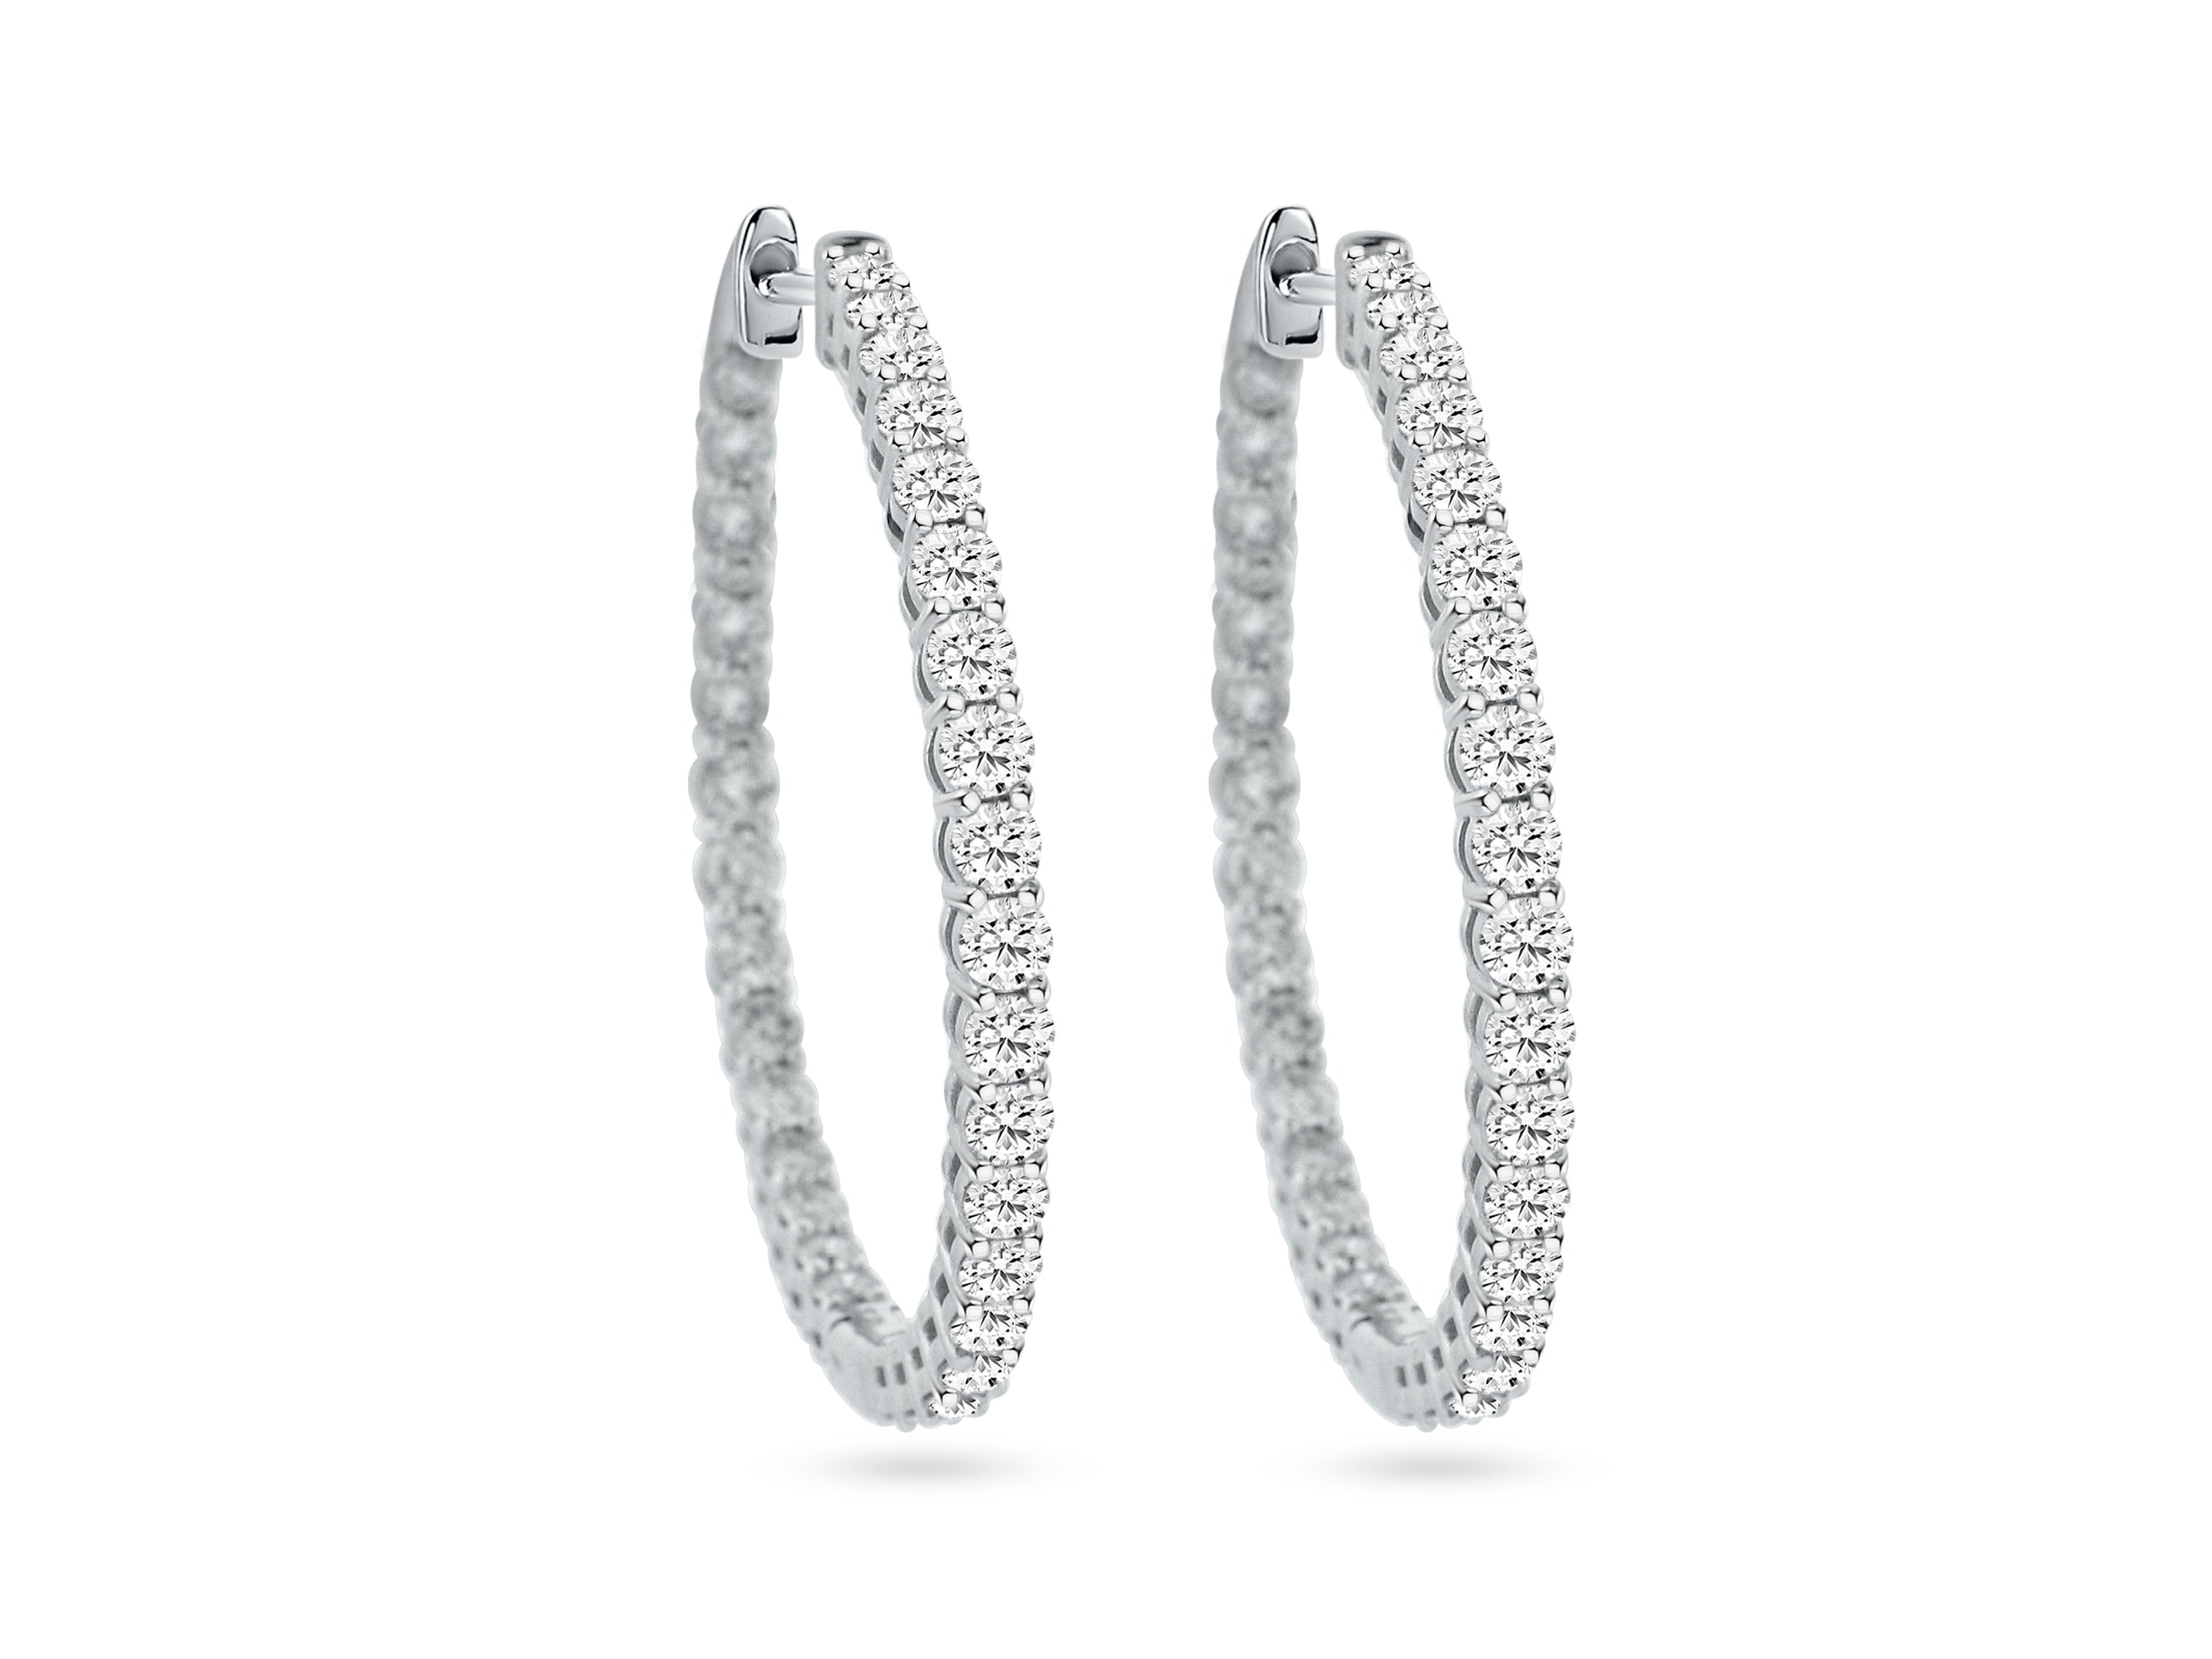 MULLOYS PRIVE'14K WHITE GOLD 4.95CT SI CLARITY G-H COLOR  DIAMOND HOOPS